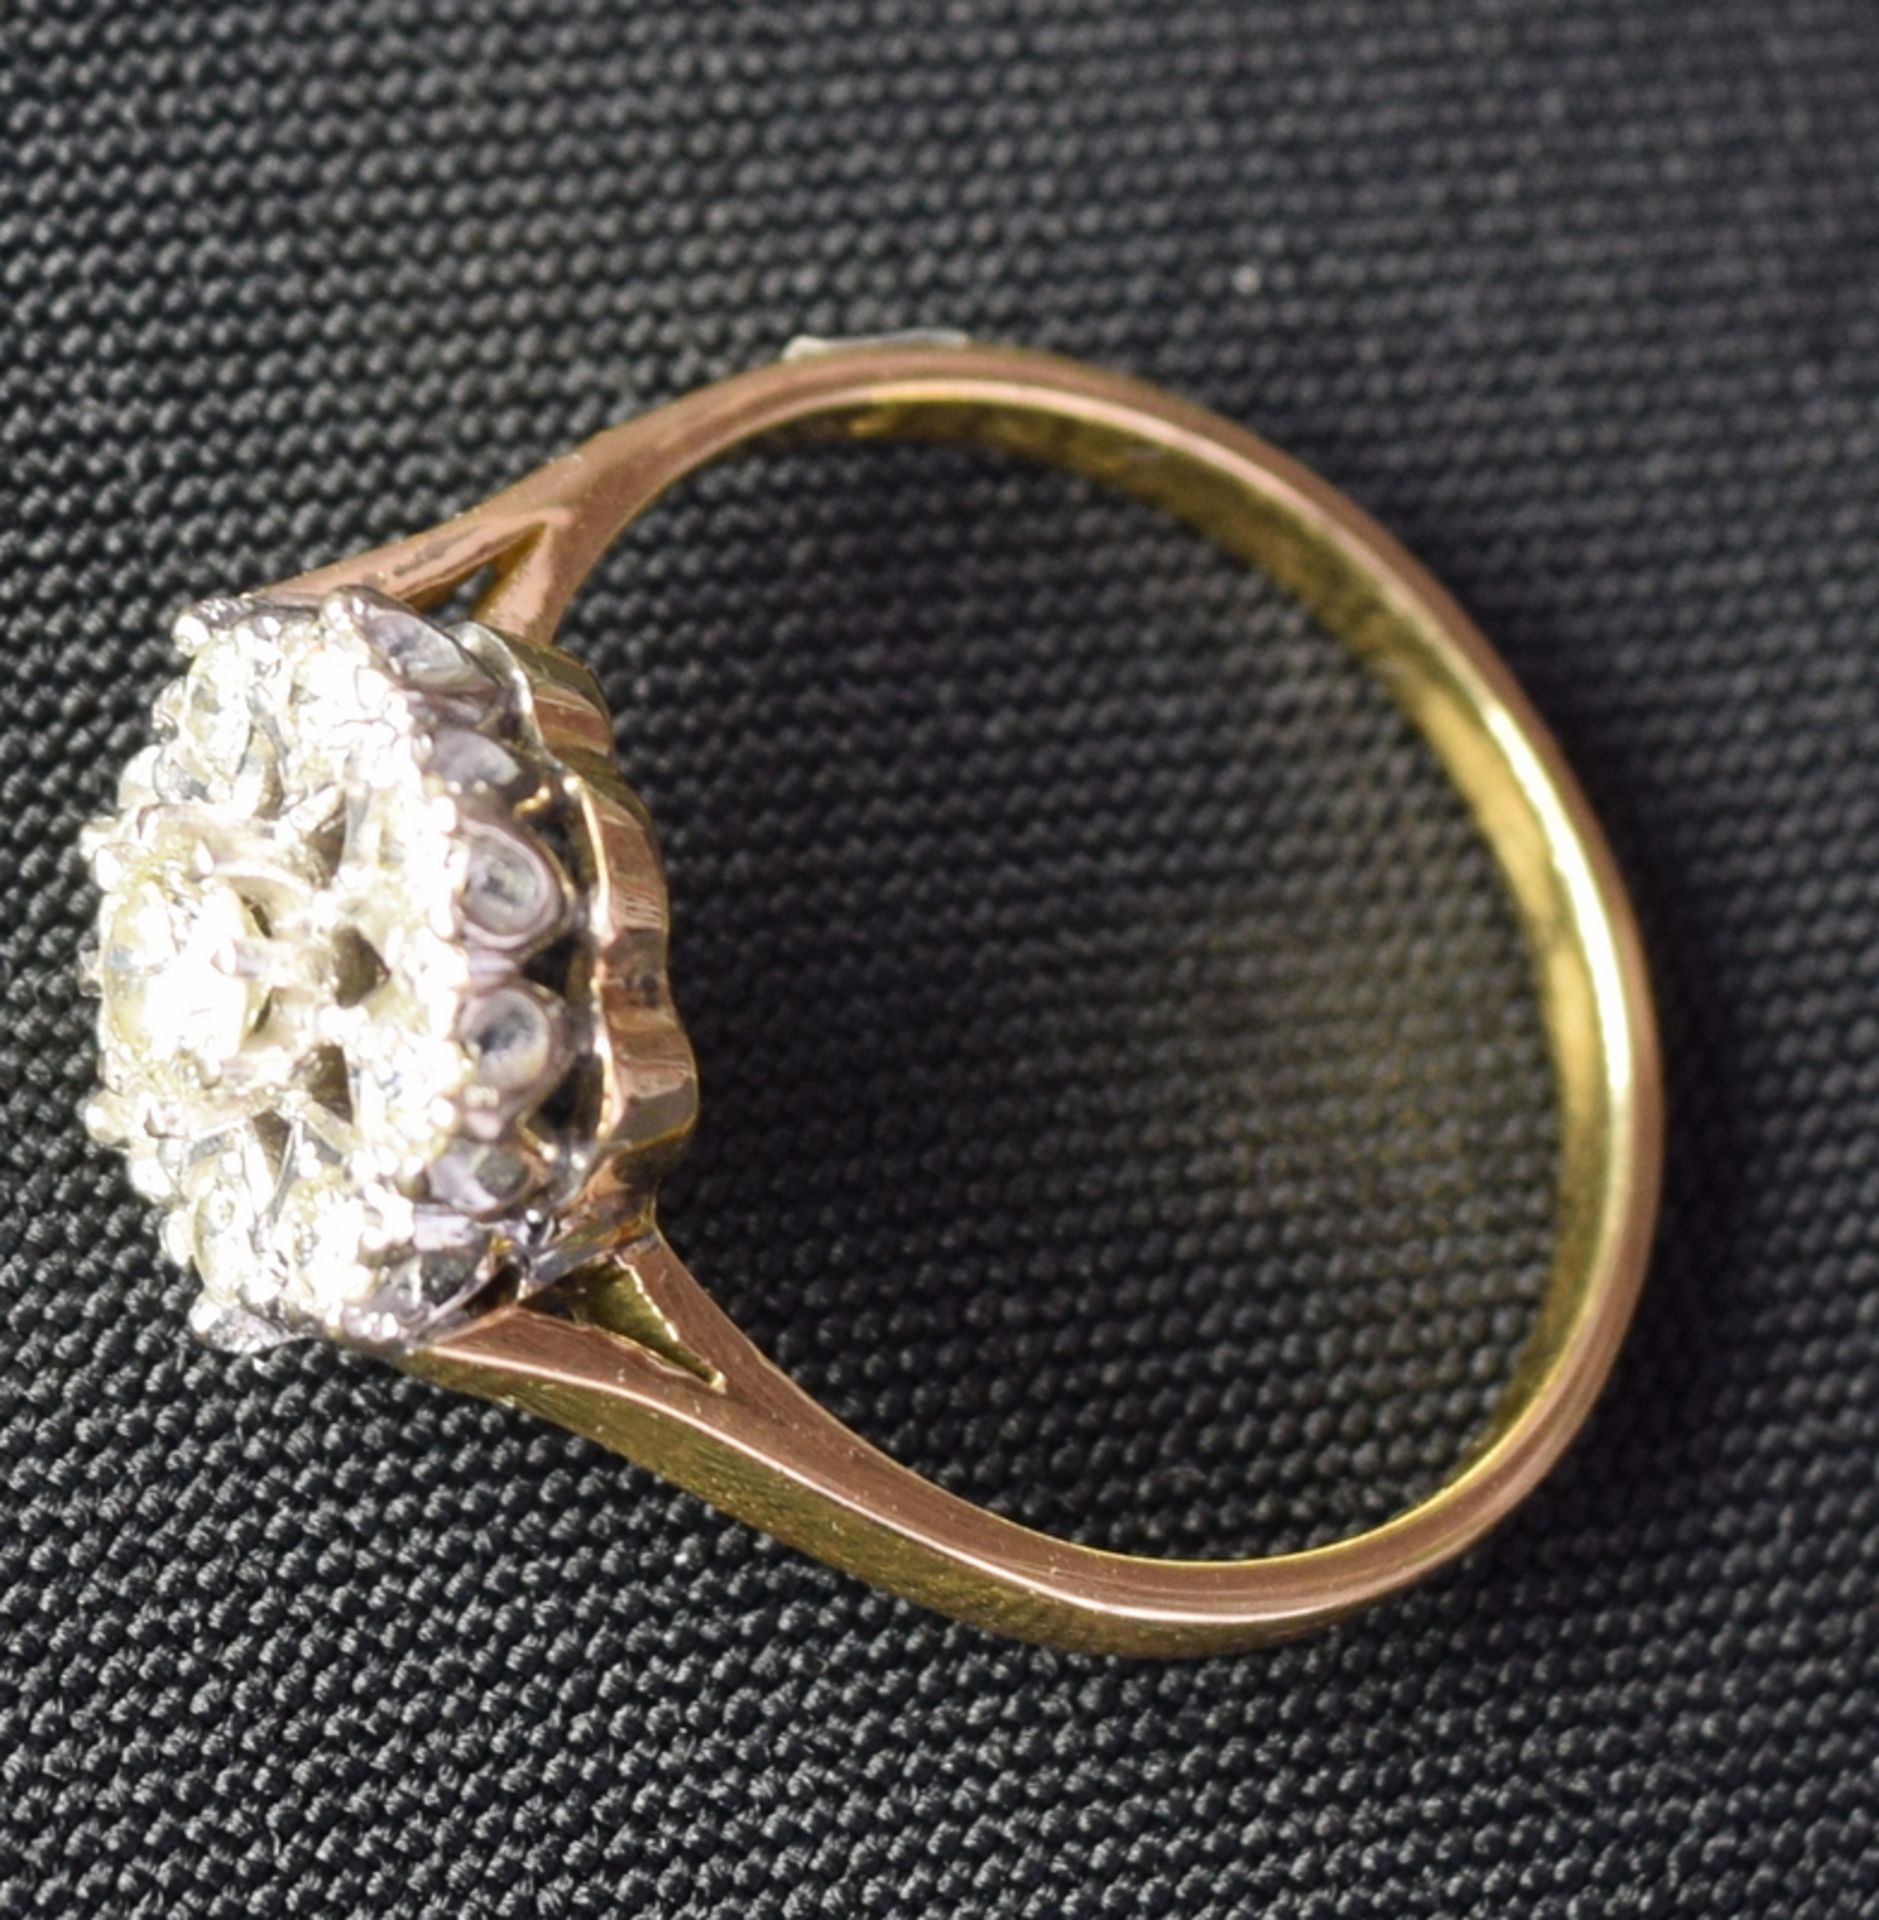 9 Diamond Cluster 18ct Gold Ring - Image 4 of 6